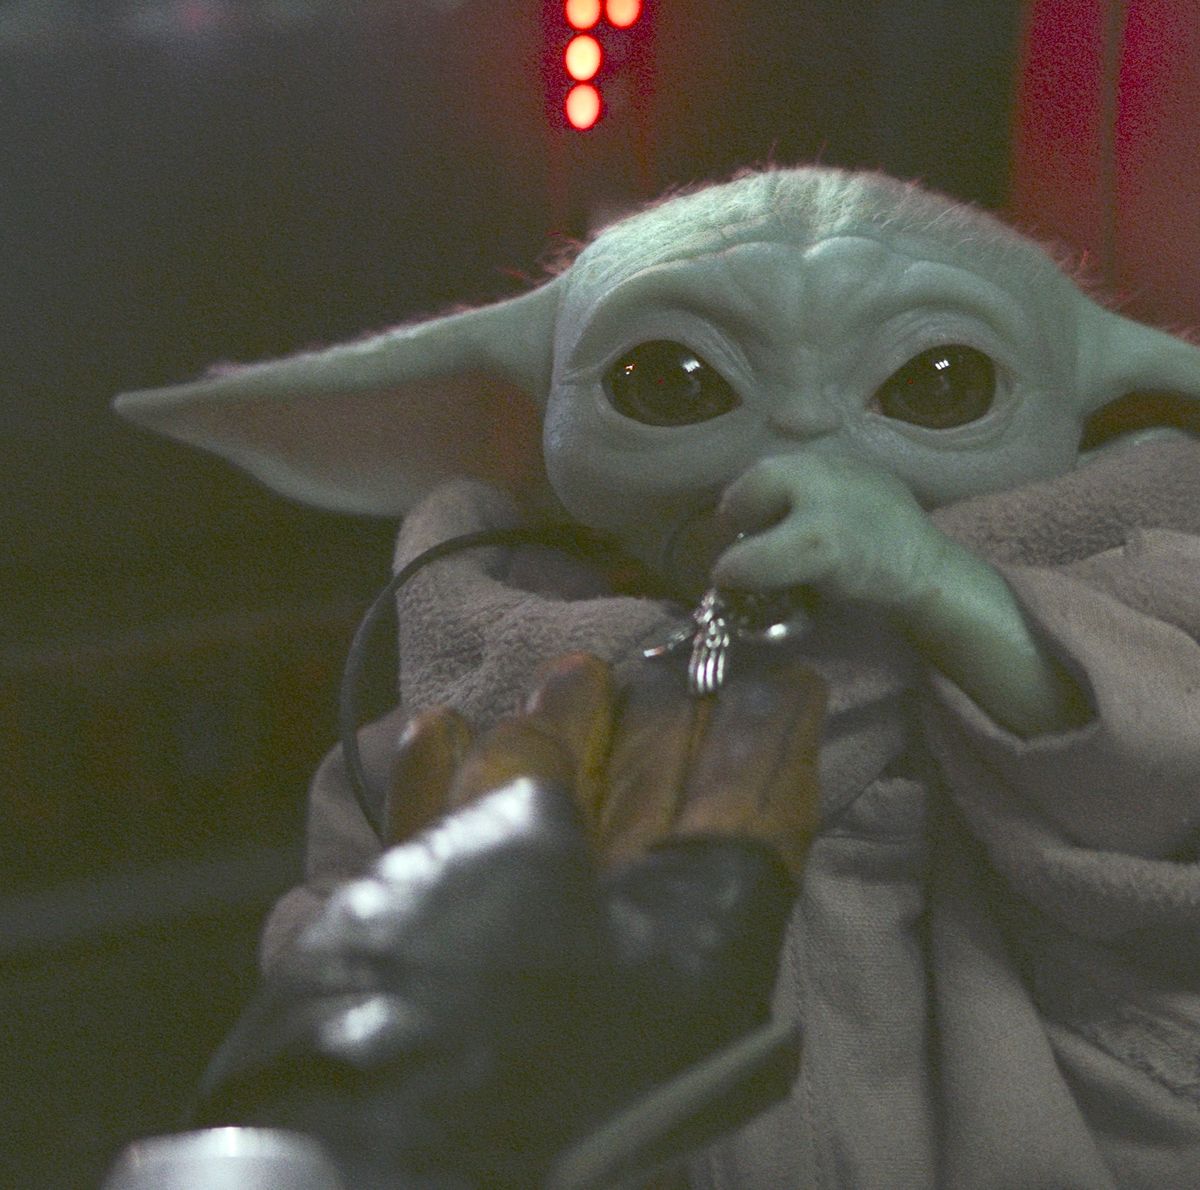 Baby Yoda Name - The Child's Actual Name to Be Revealed in The Mandalorain